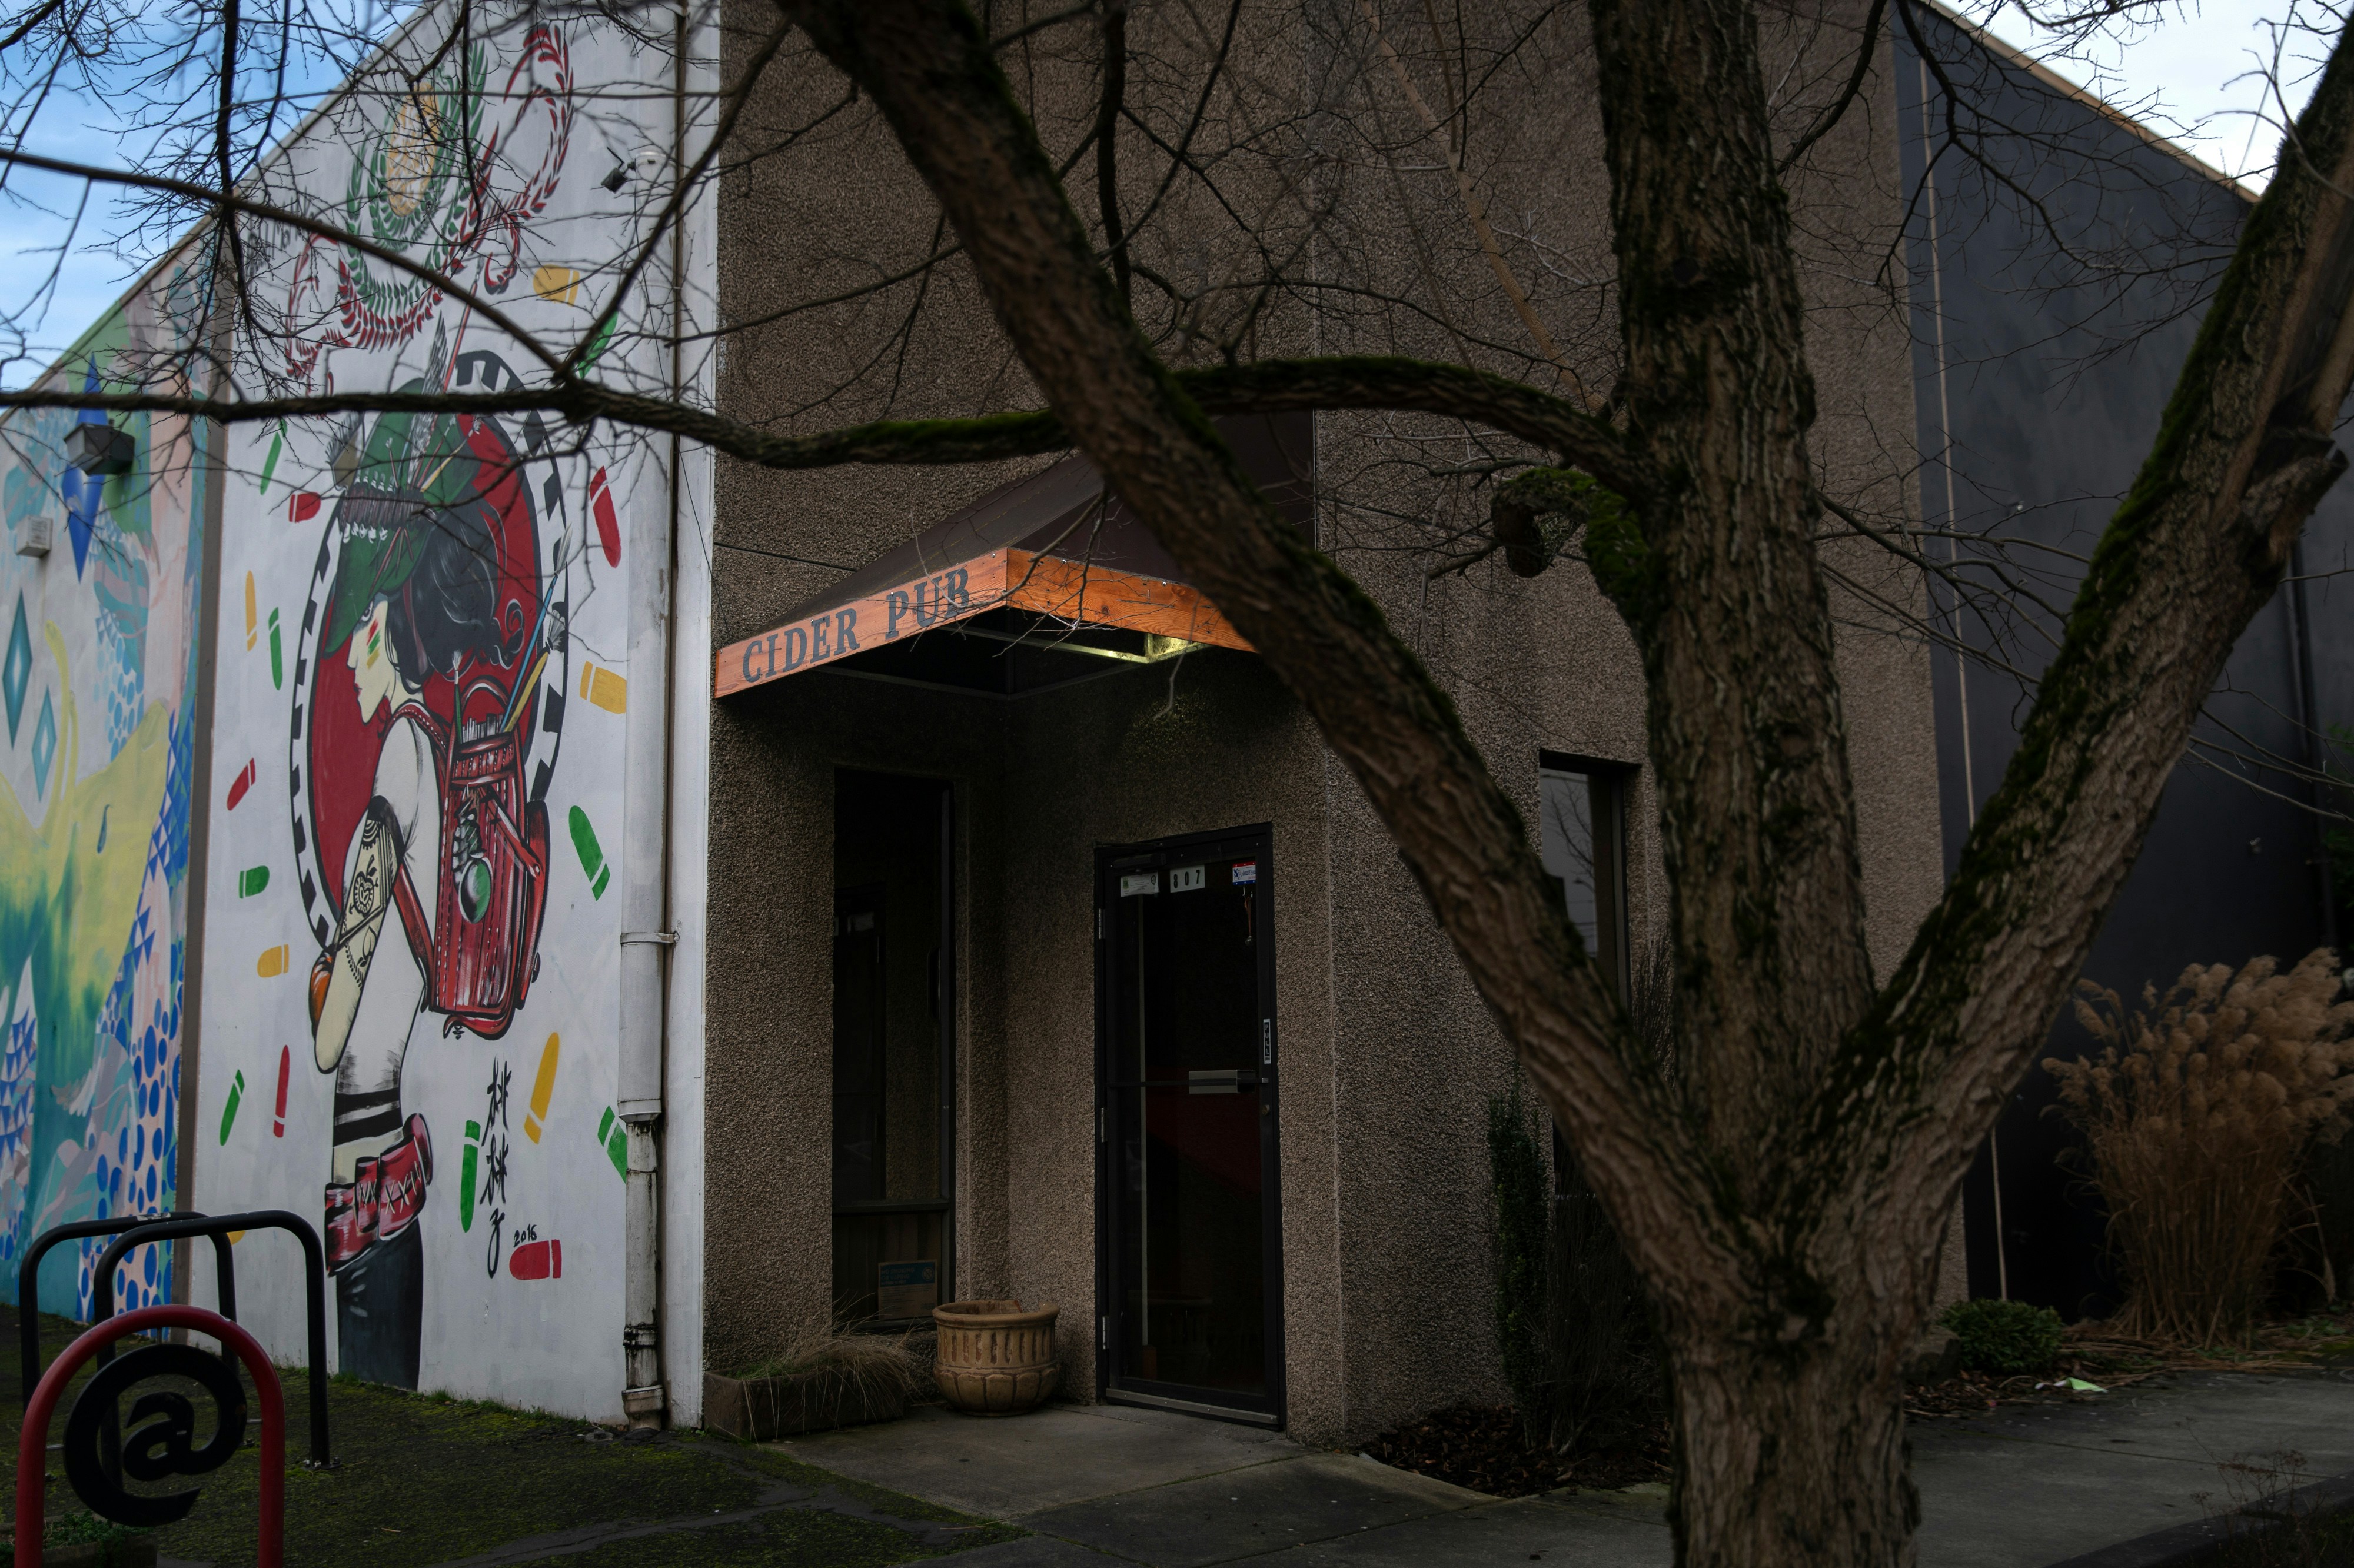 The site of the former Cider Riot bar in Northeast Portland is seen on January 29, 2021. Sean Kealiher, 23, an anti-facist activist was killed several blocks away after leaving the bar in 2019.